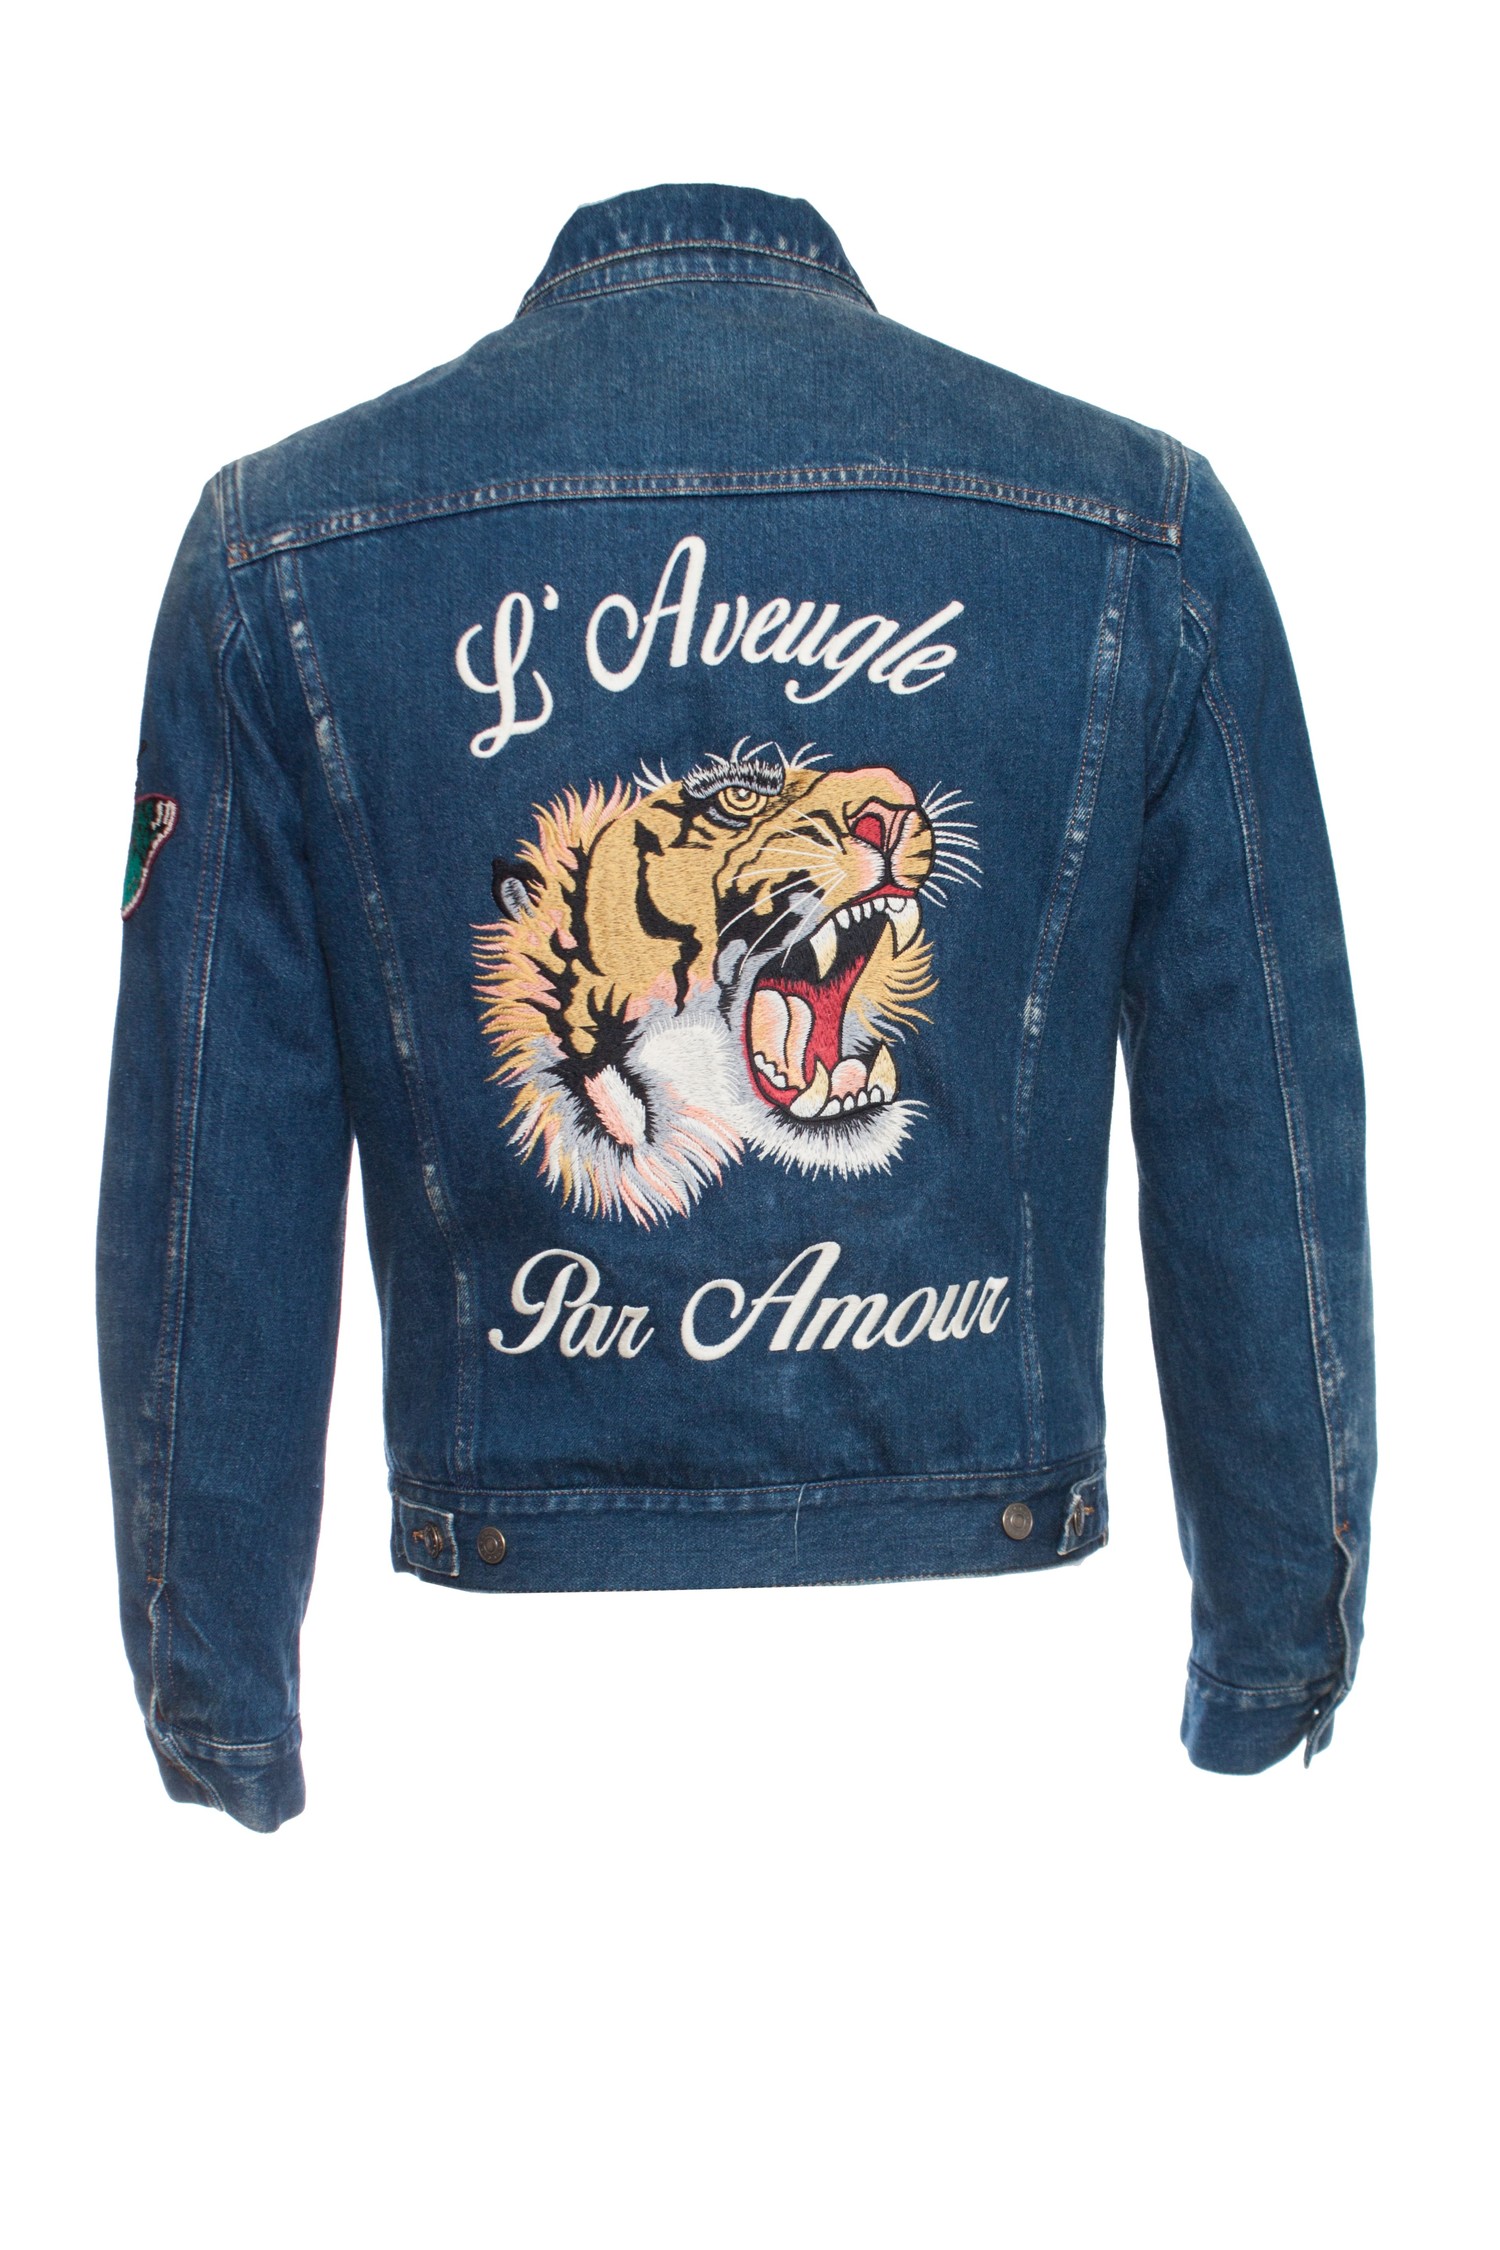 Tyranny tunnel Ung dame Gucci, Denim jacket with embroideries. - Unique Designer Pieces